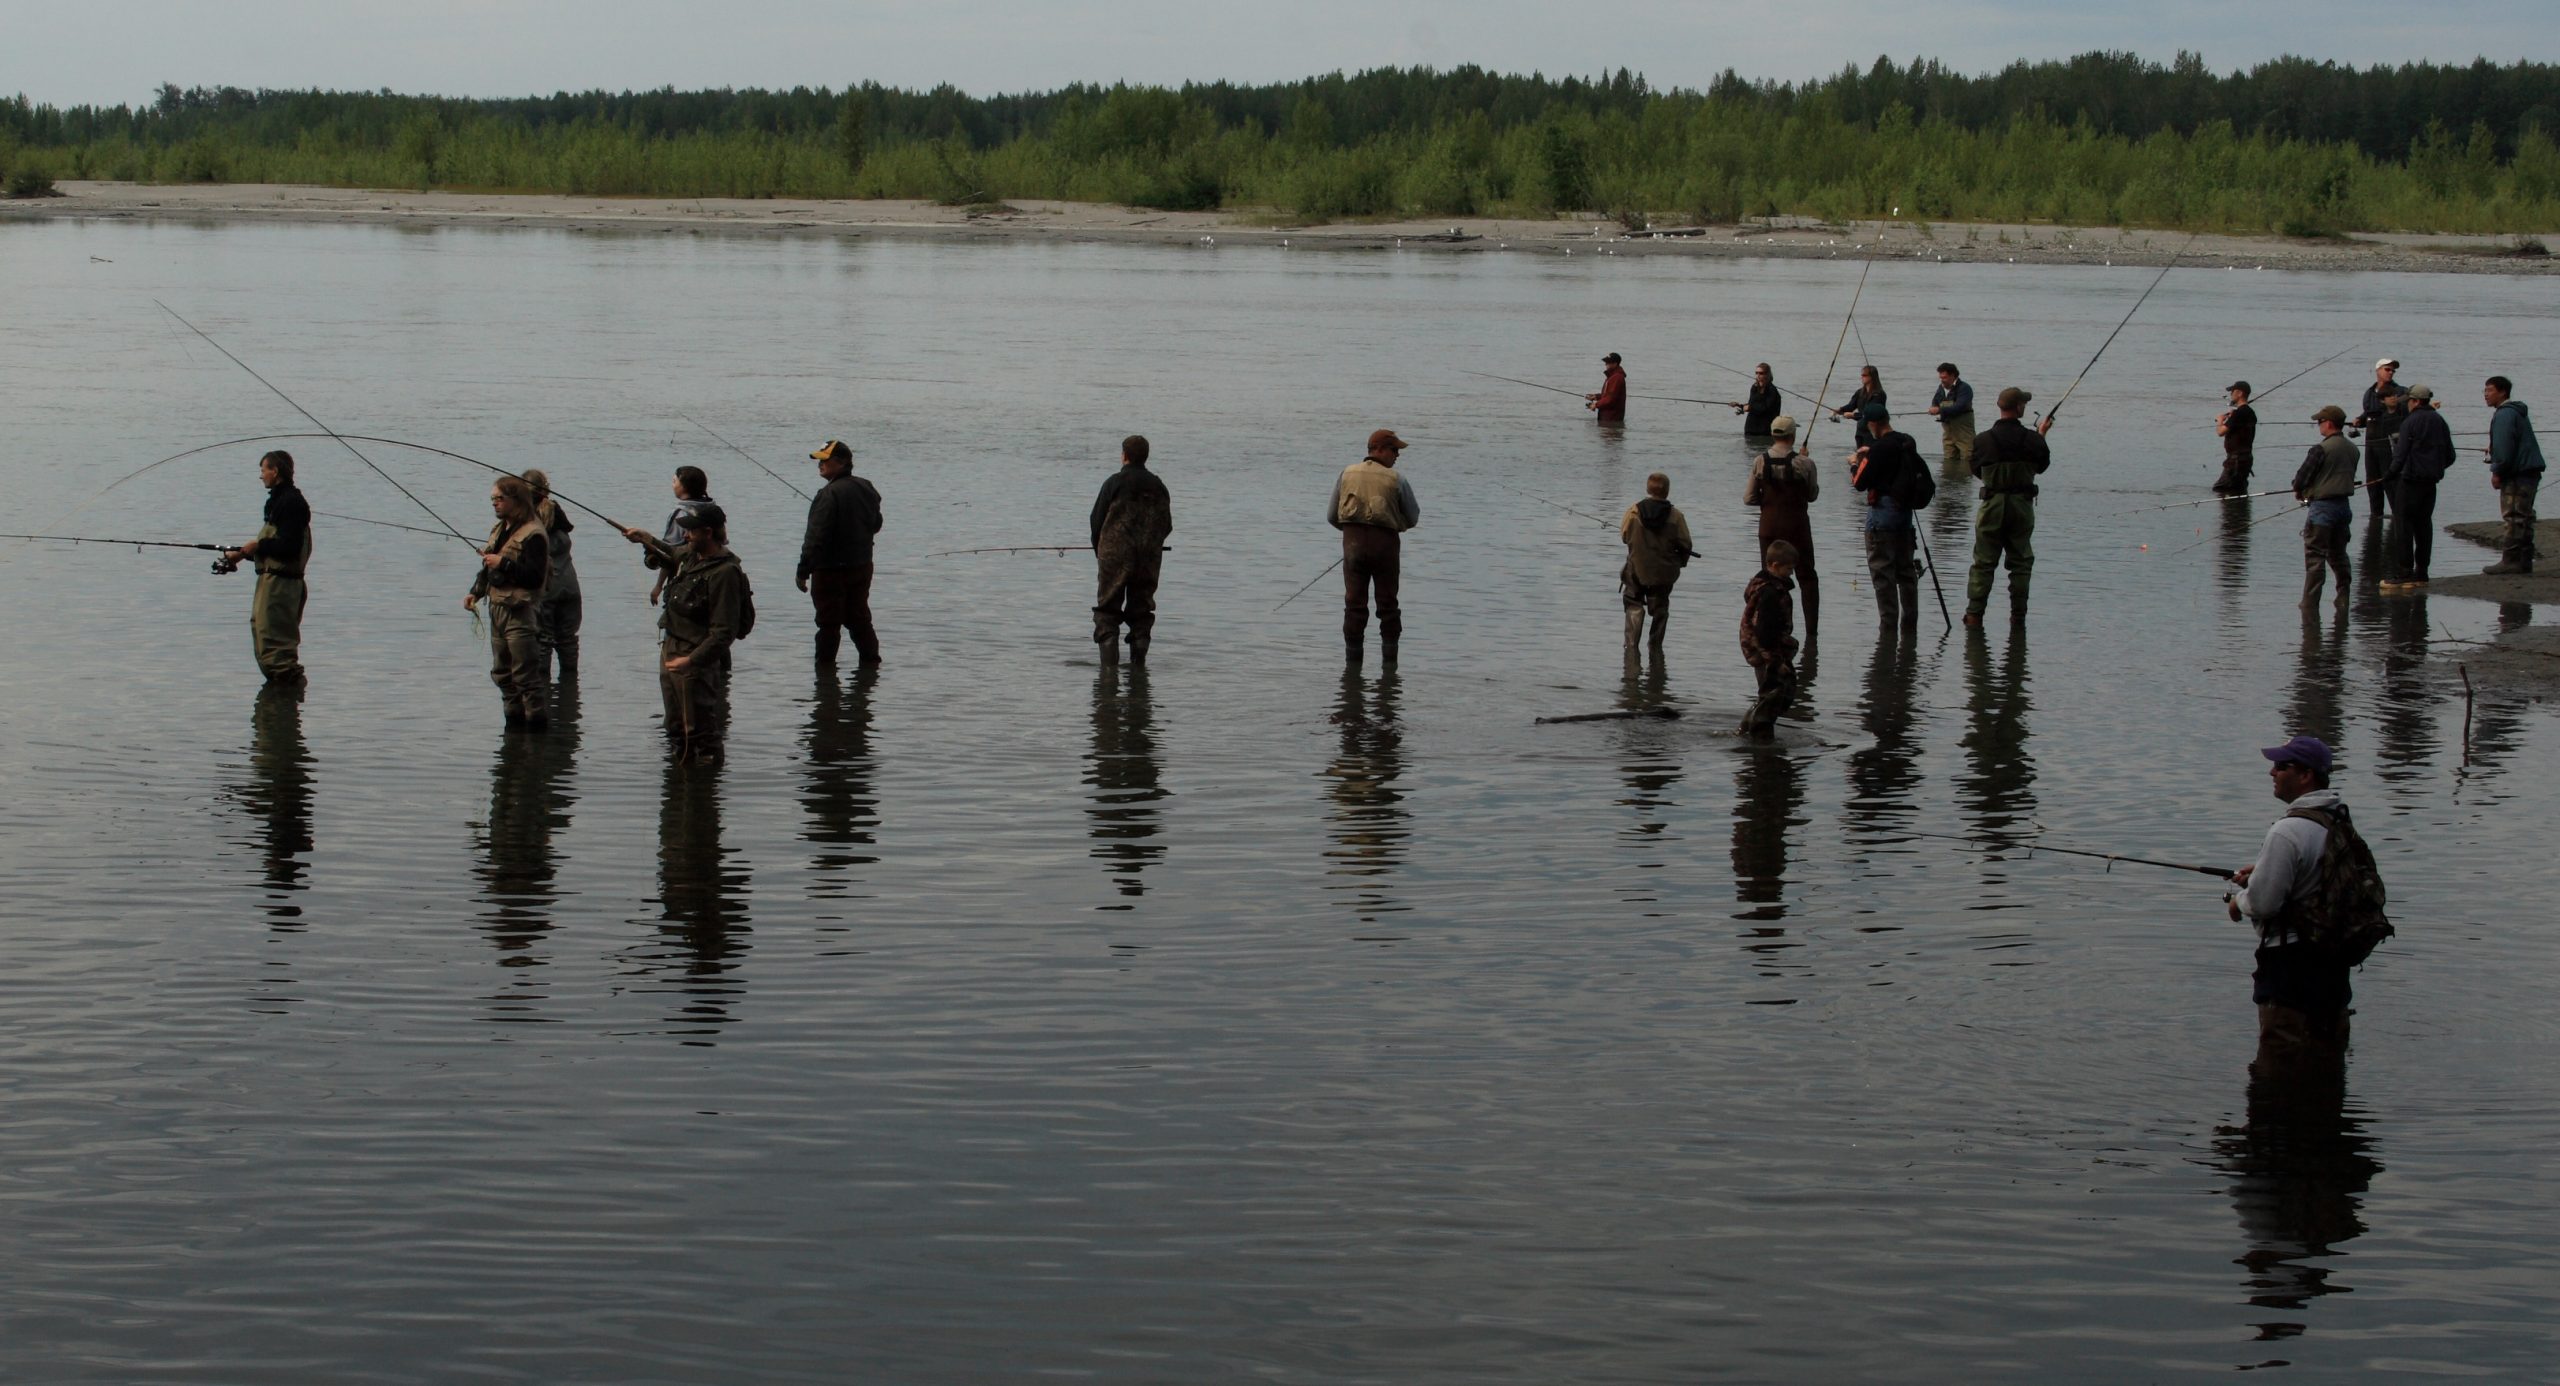 Crowd of people wading in shallow water while recreational fishing